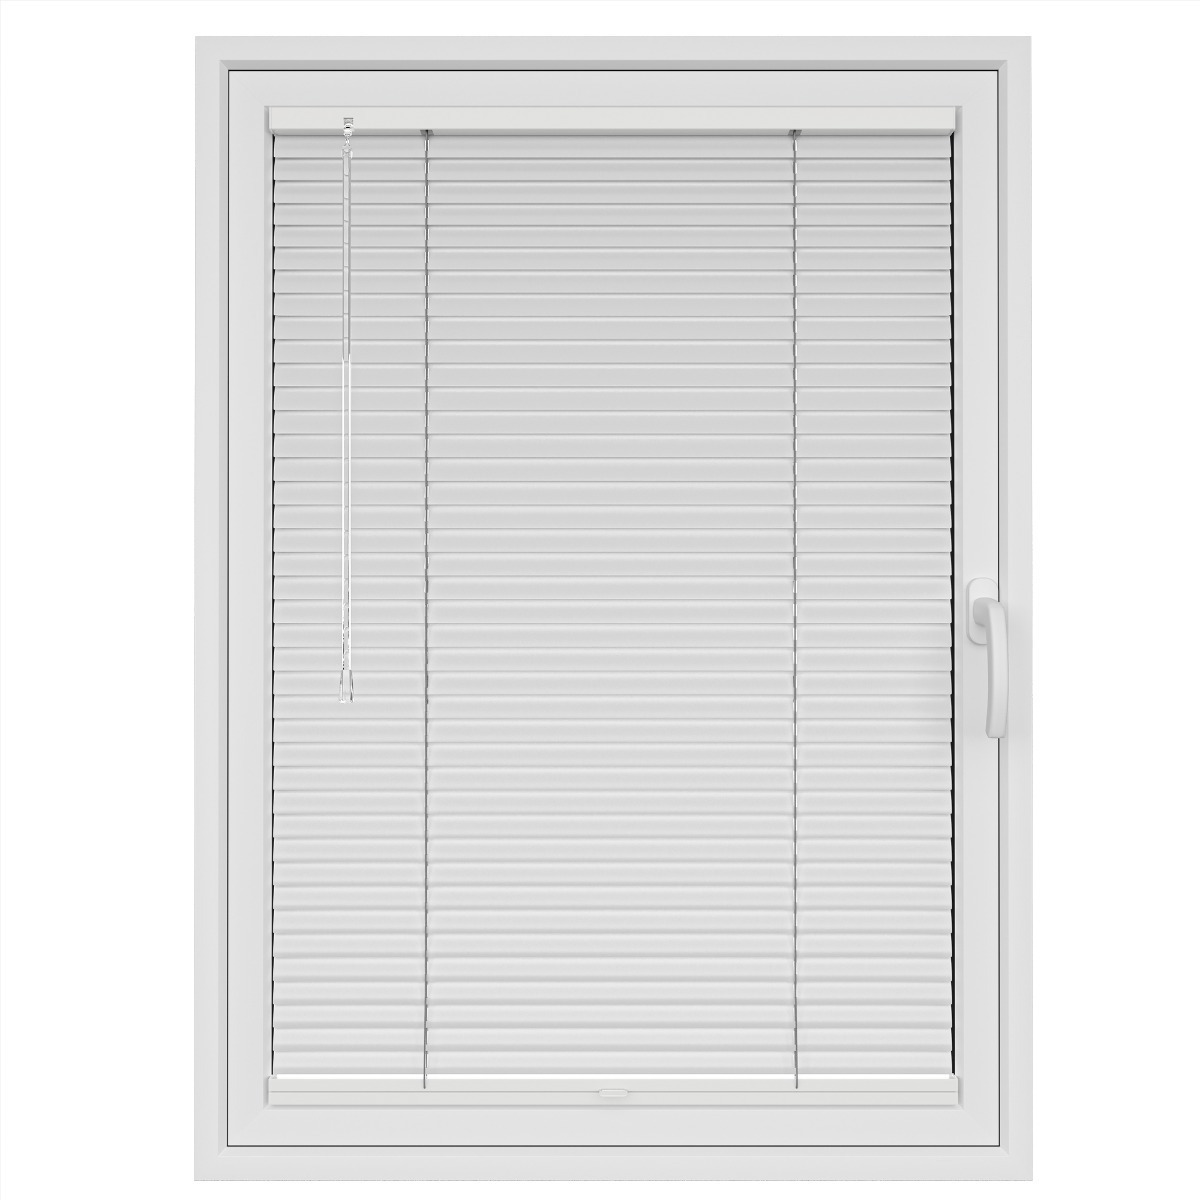 Oyster White Gloss Clic Fit - image 1